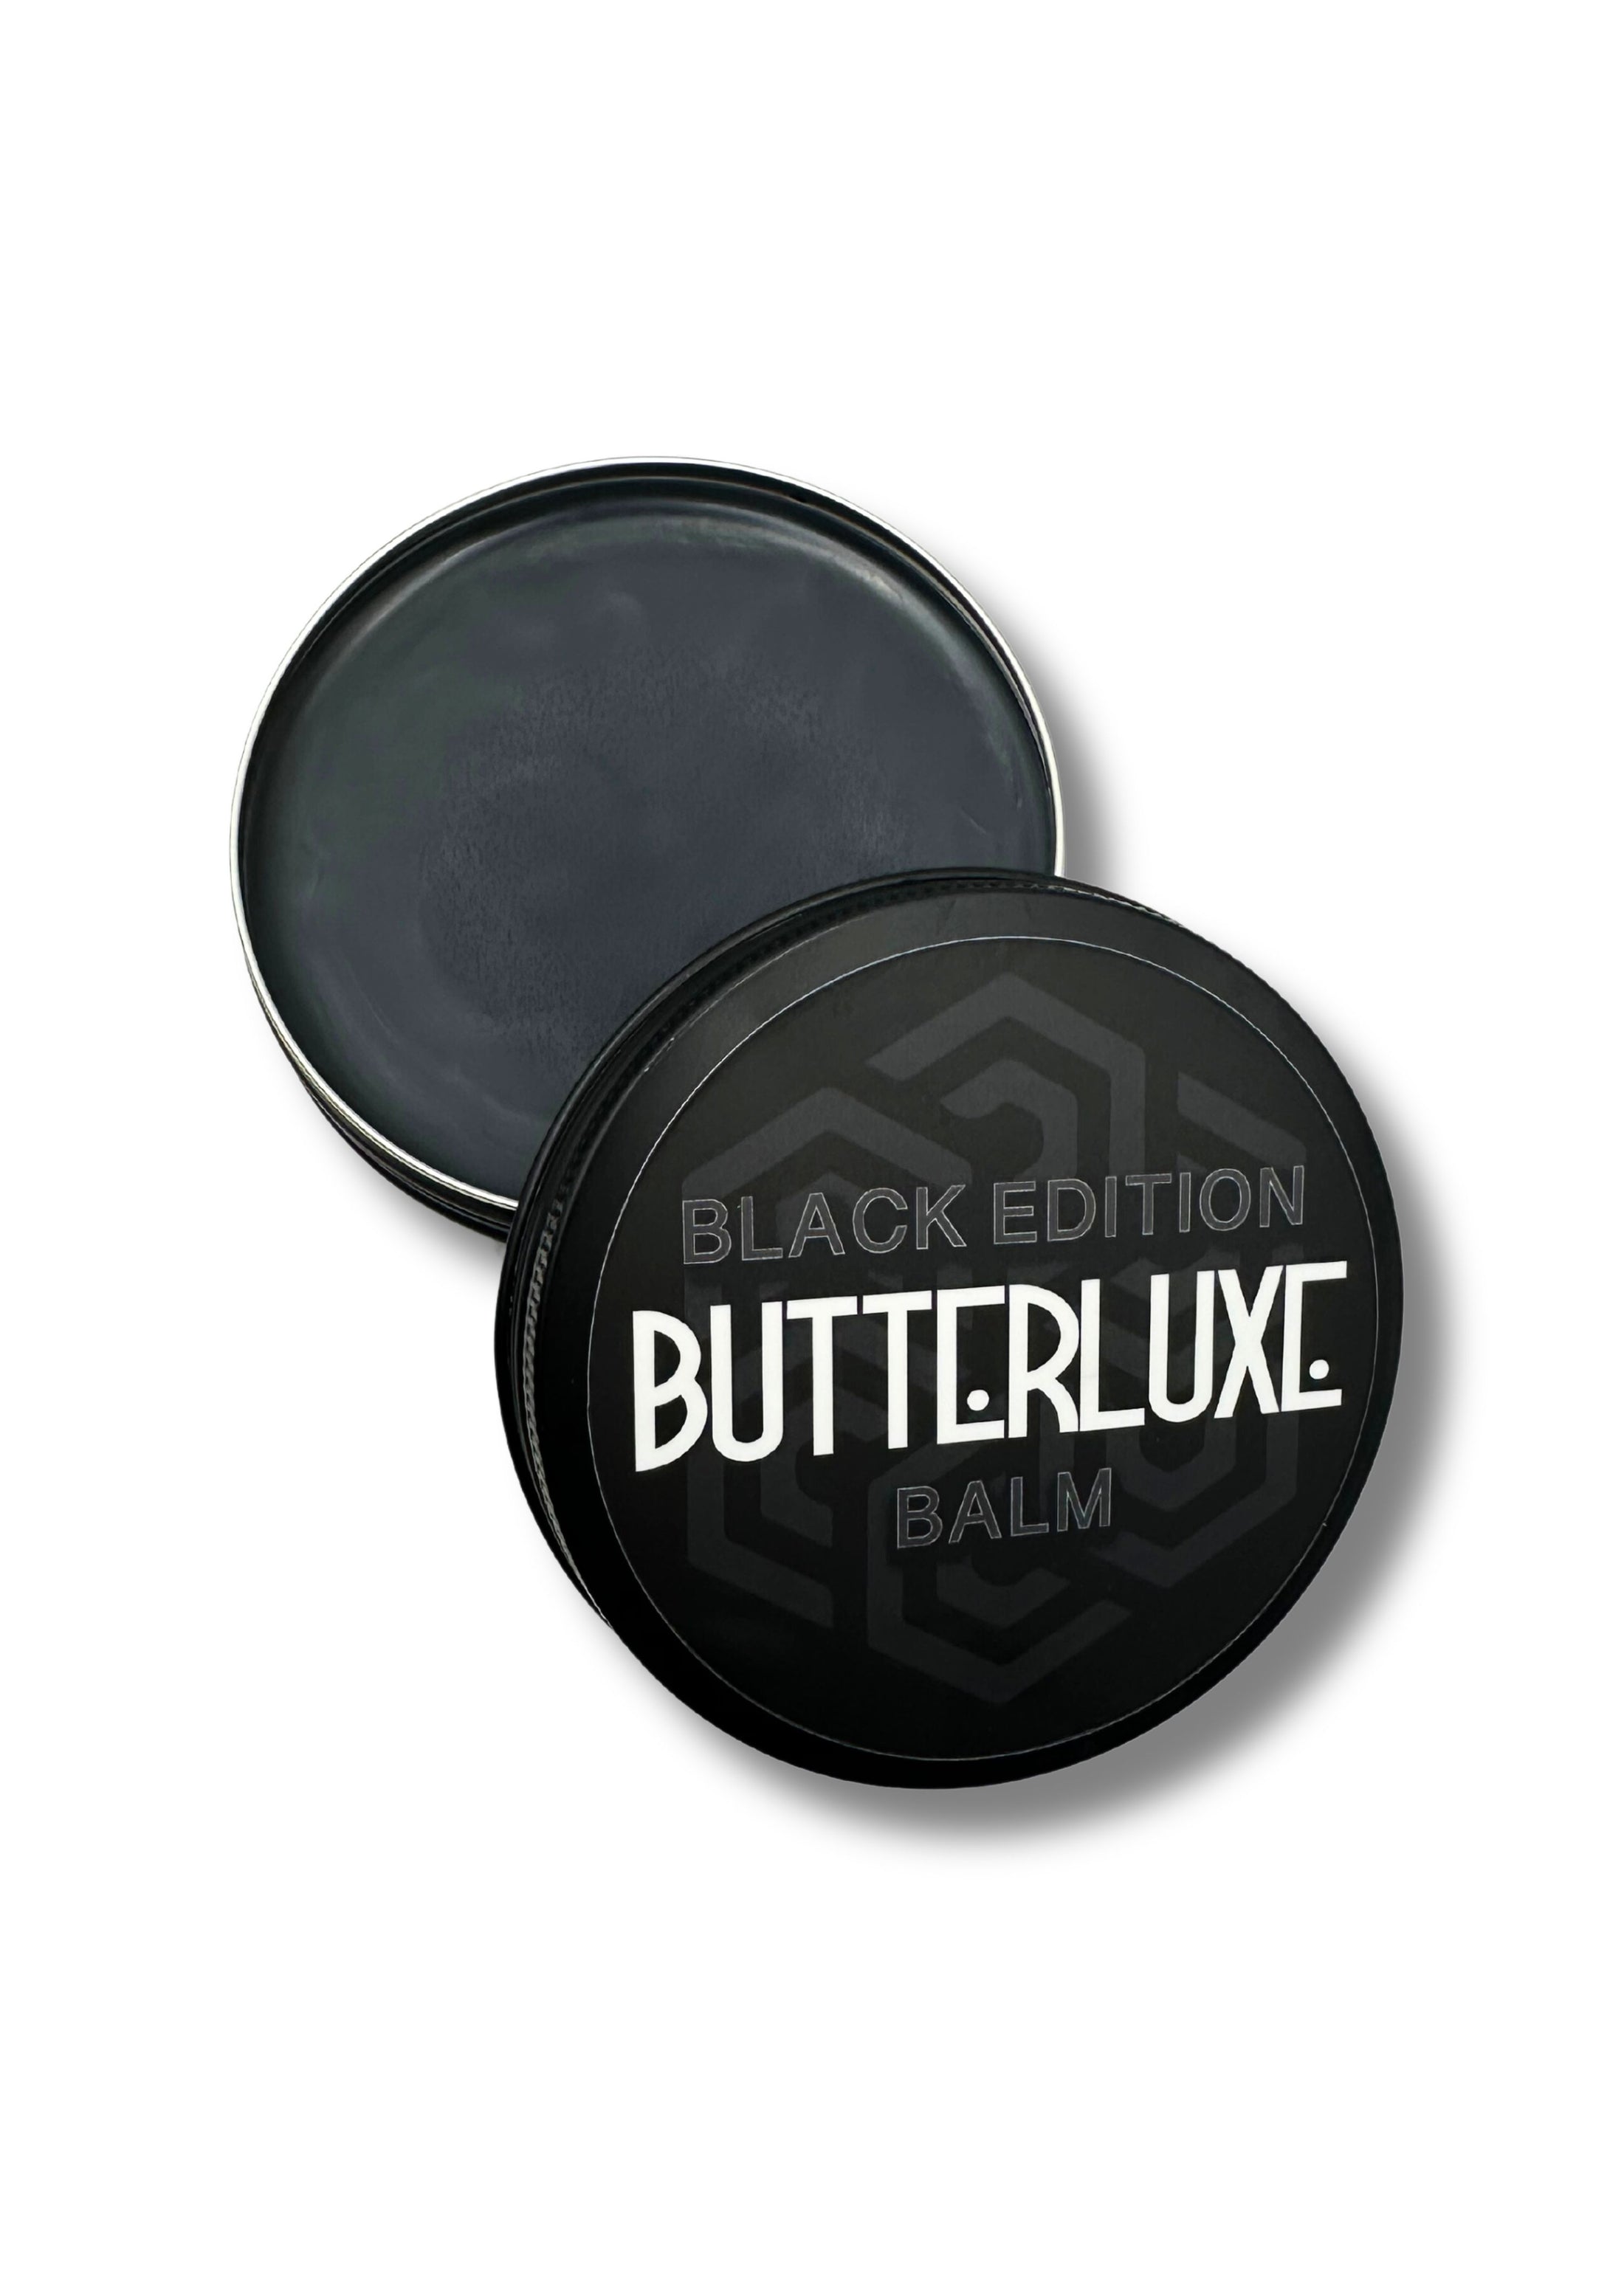 Black Edition Balm – Butterluxe Limited